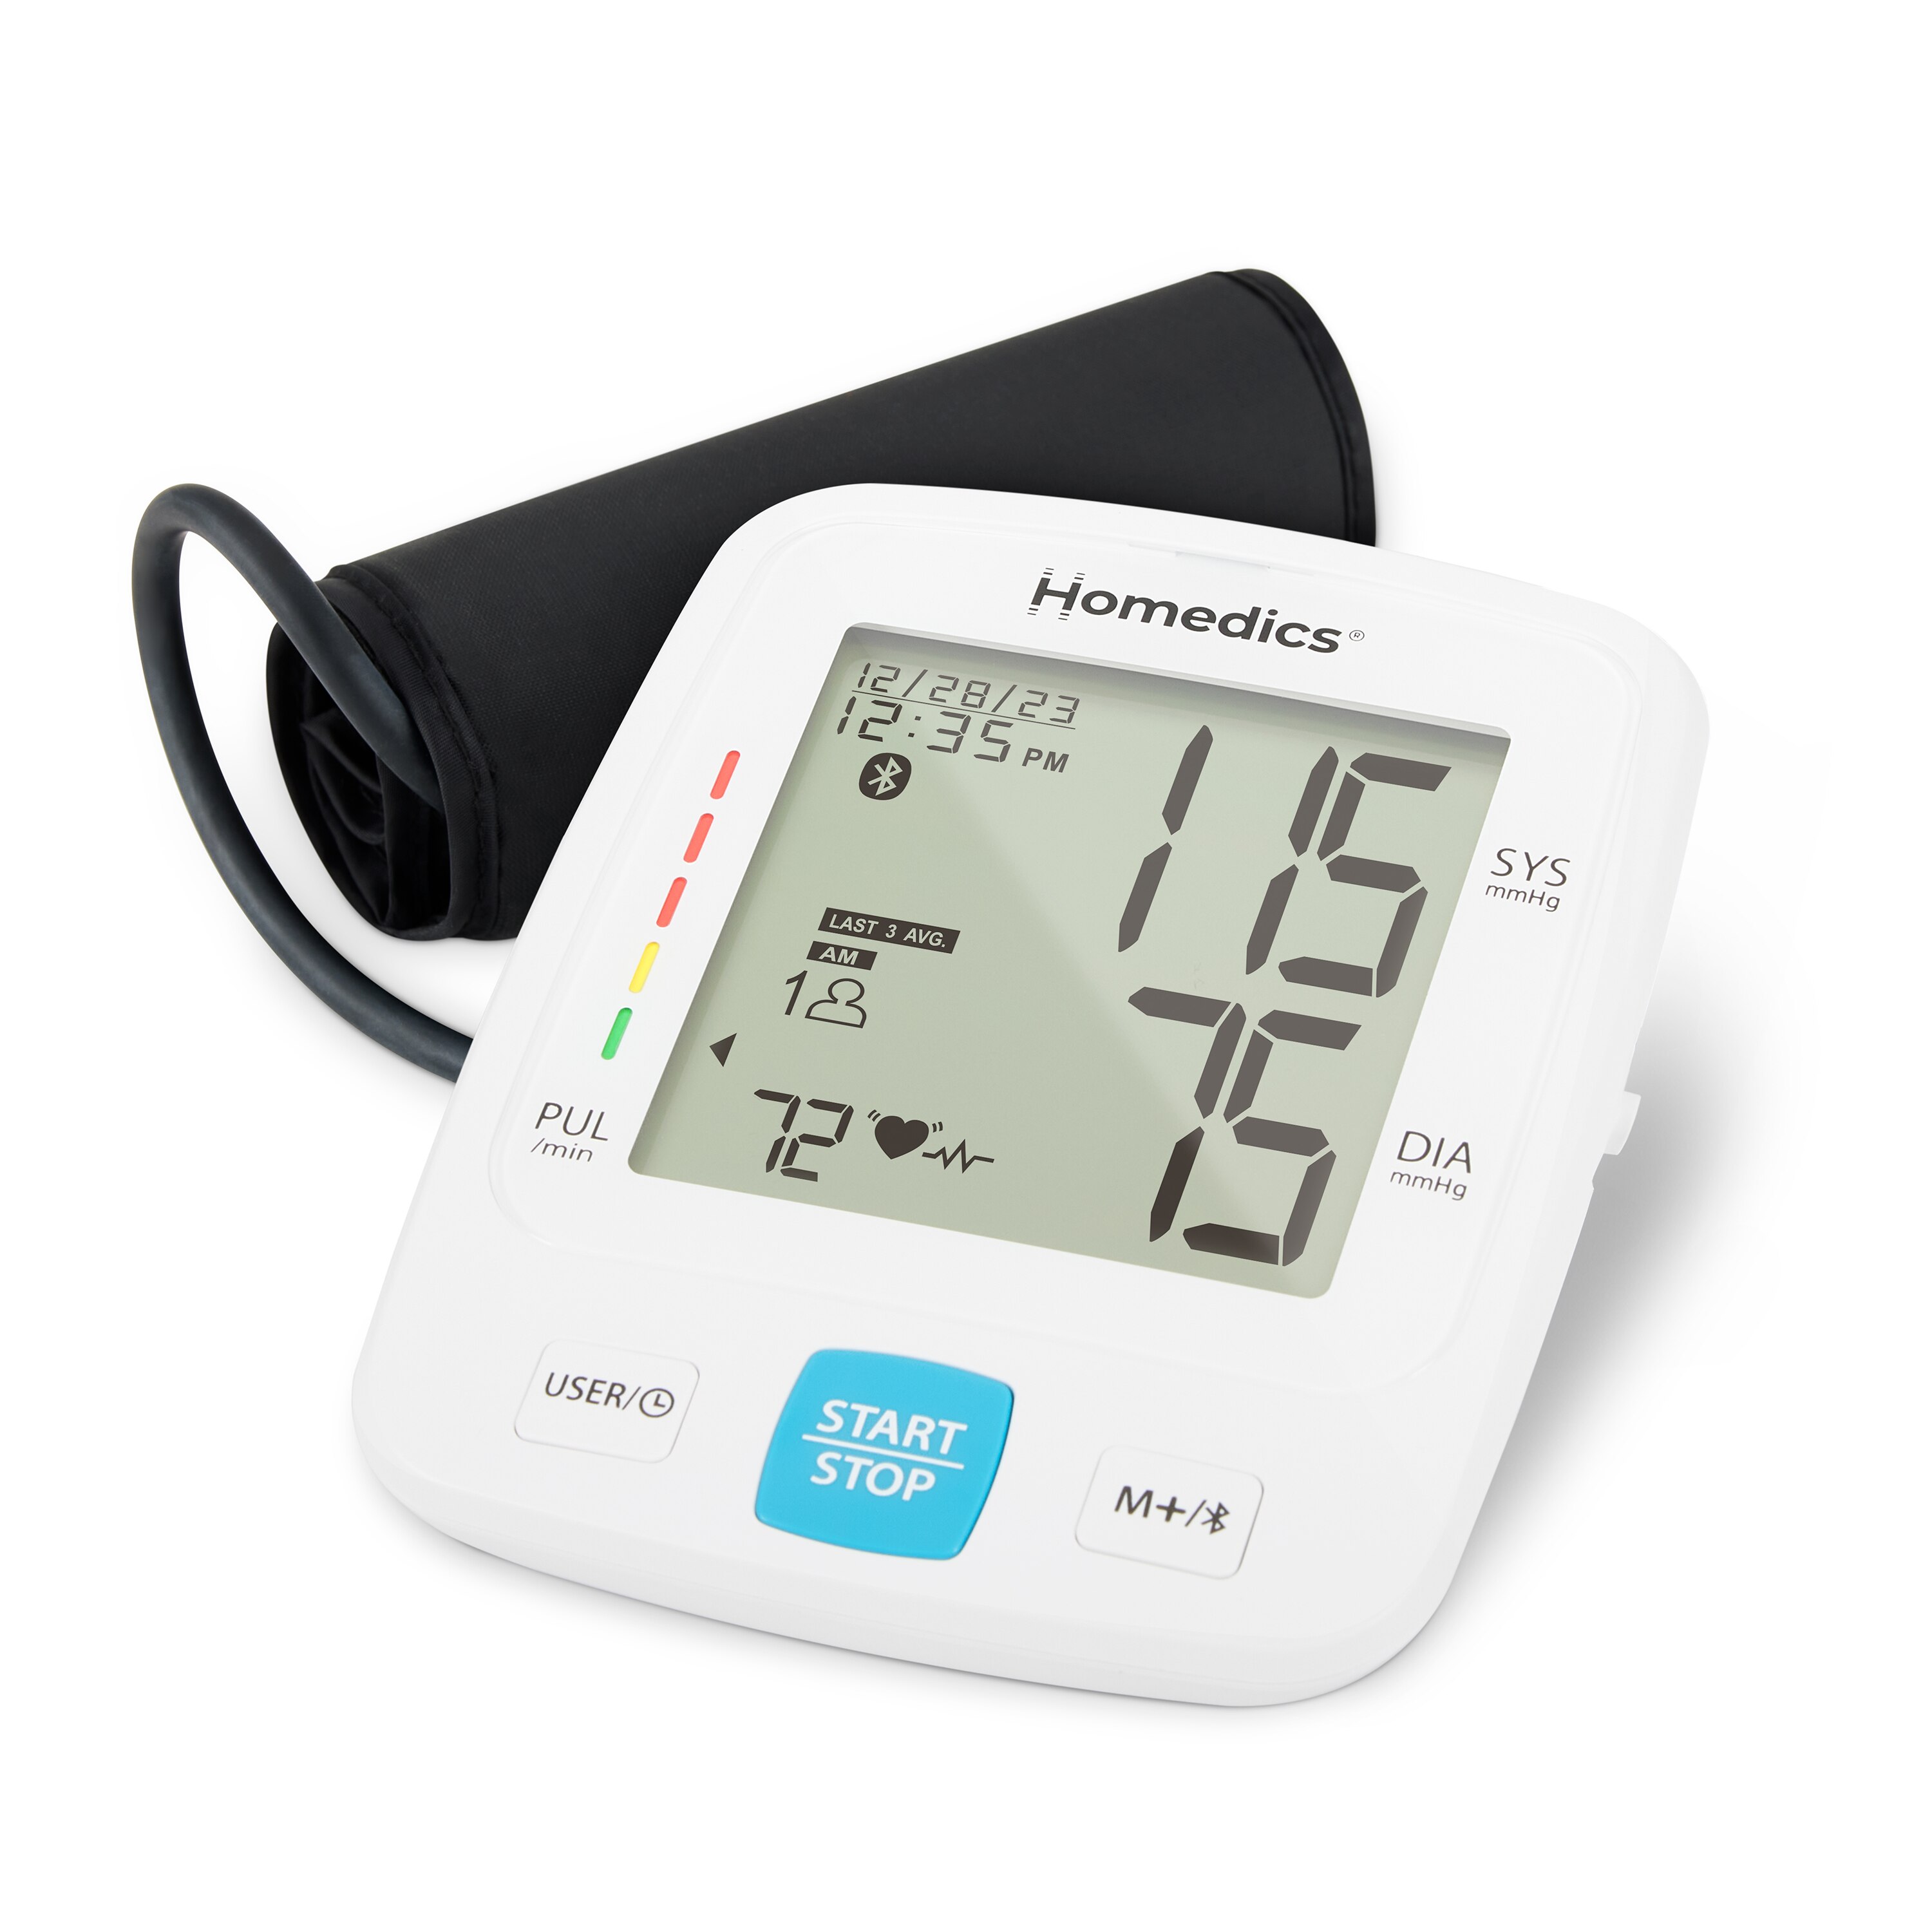 Upper arm blood pressure monitor for the home